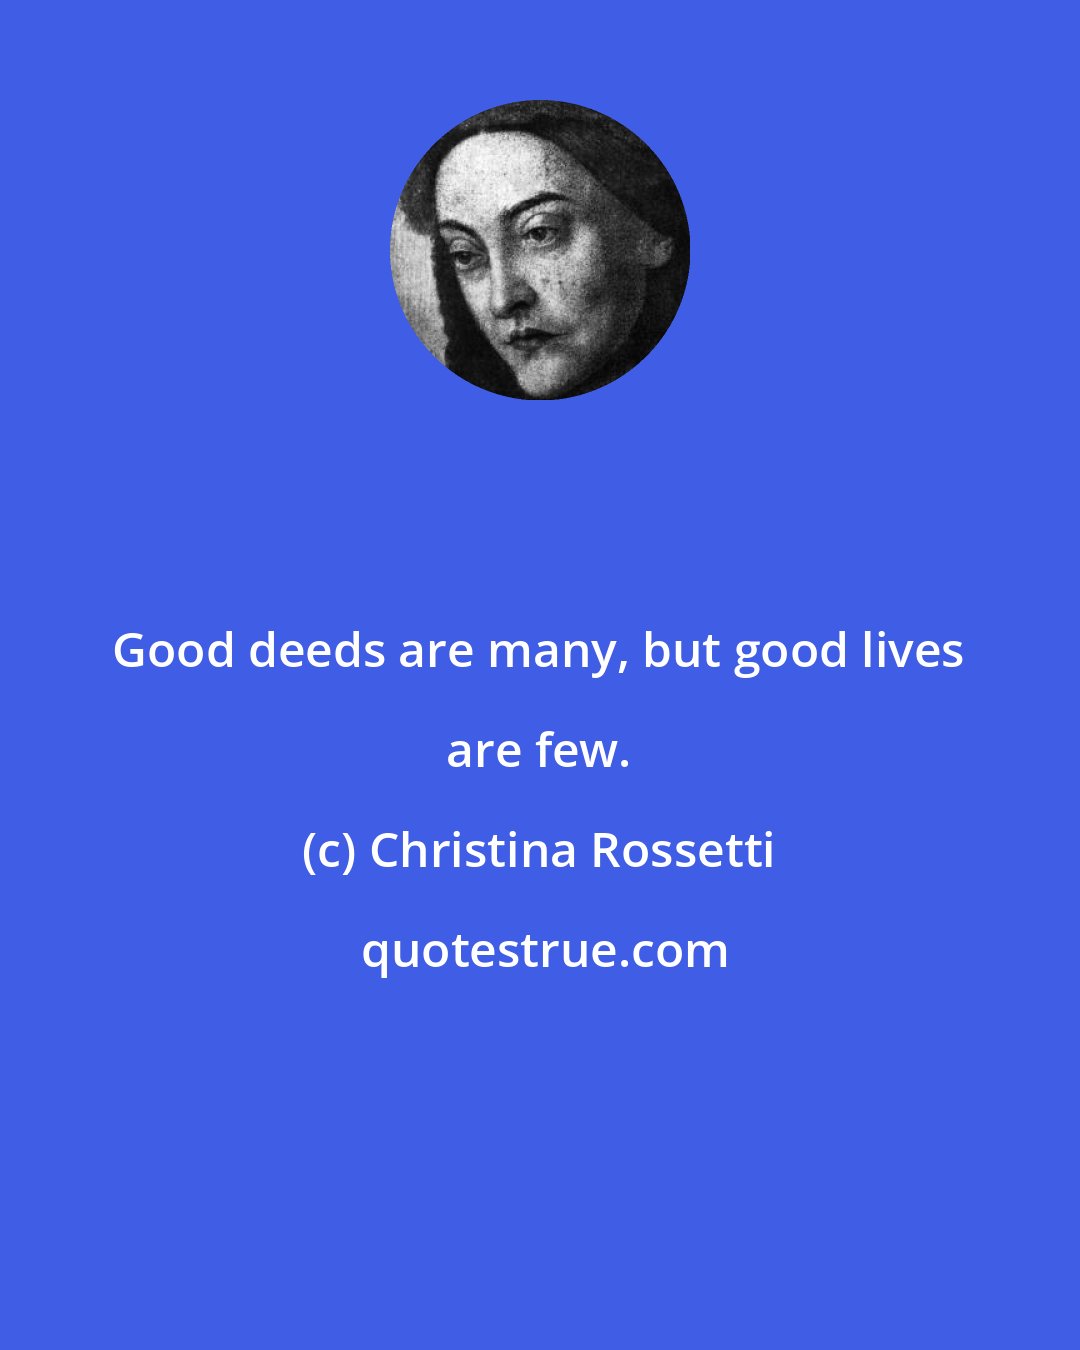 Christina Rossetti: Good deeds are many, but good lives are few.